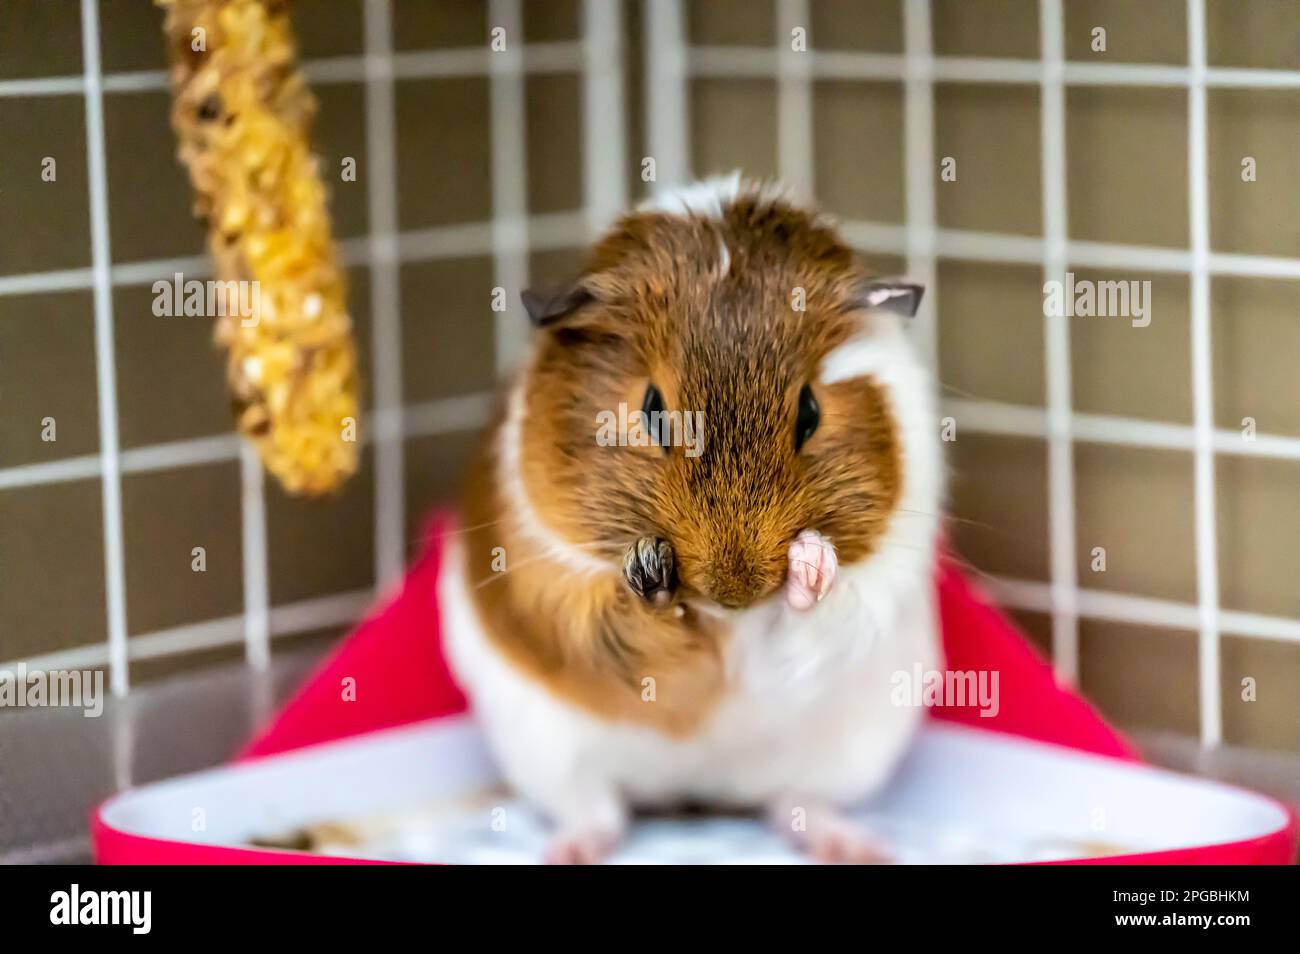 Guinea pig grooming herself by cleaning fur and whiskers Stock Photo